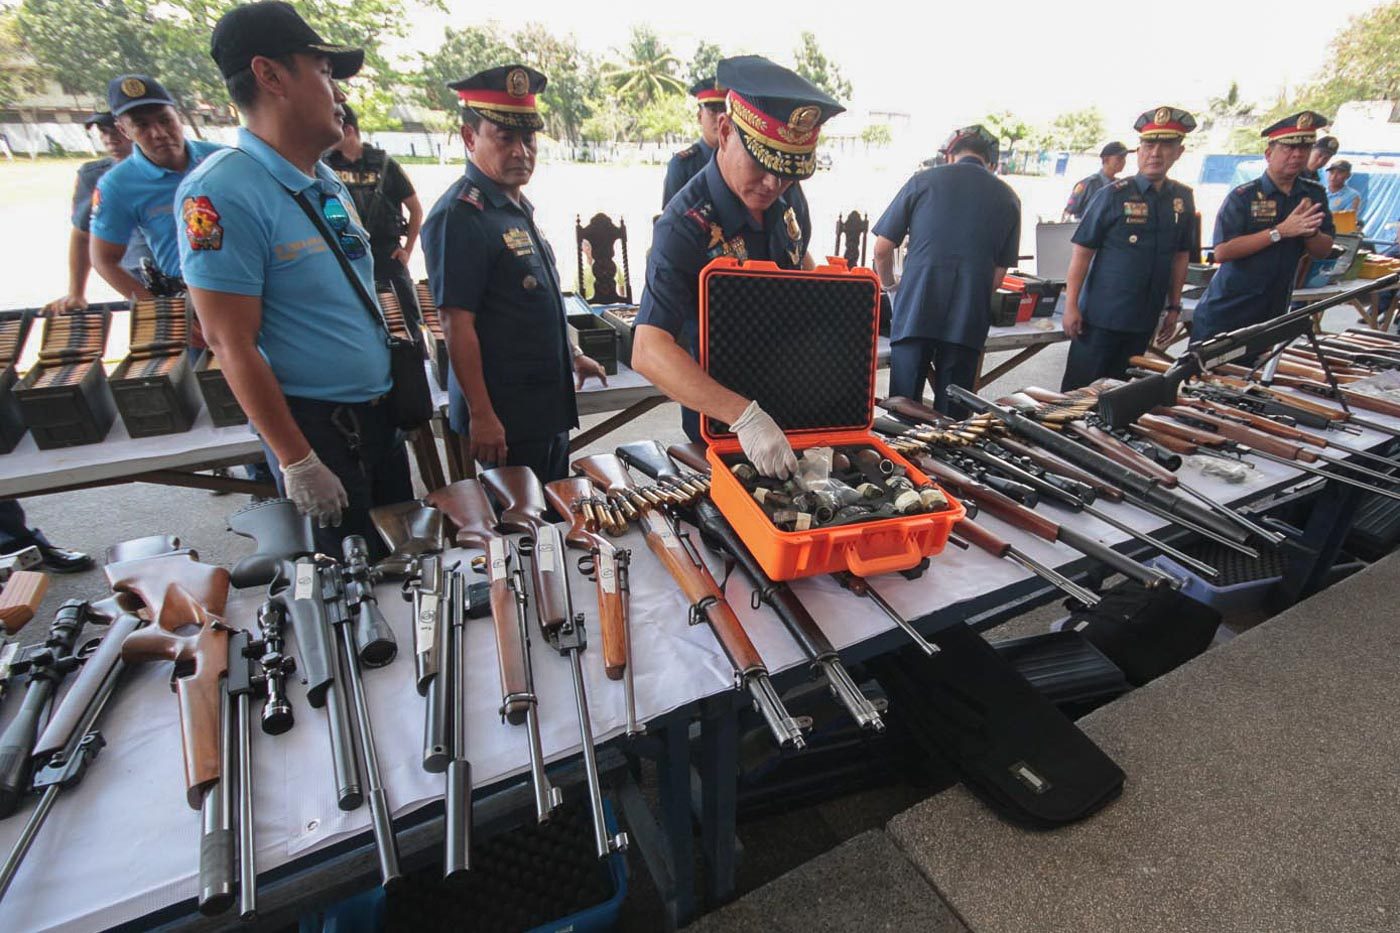 Police recover weaponry inside INC compound, but who’s liable?